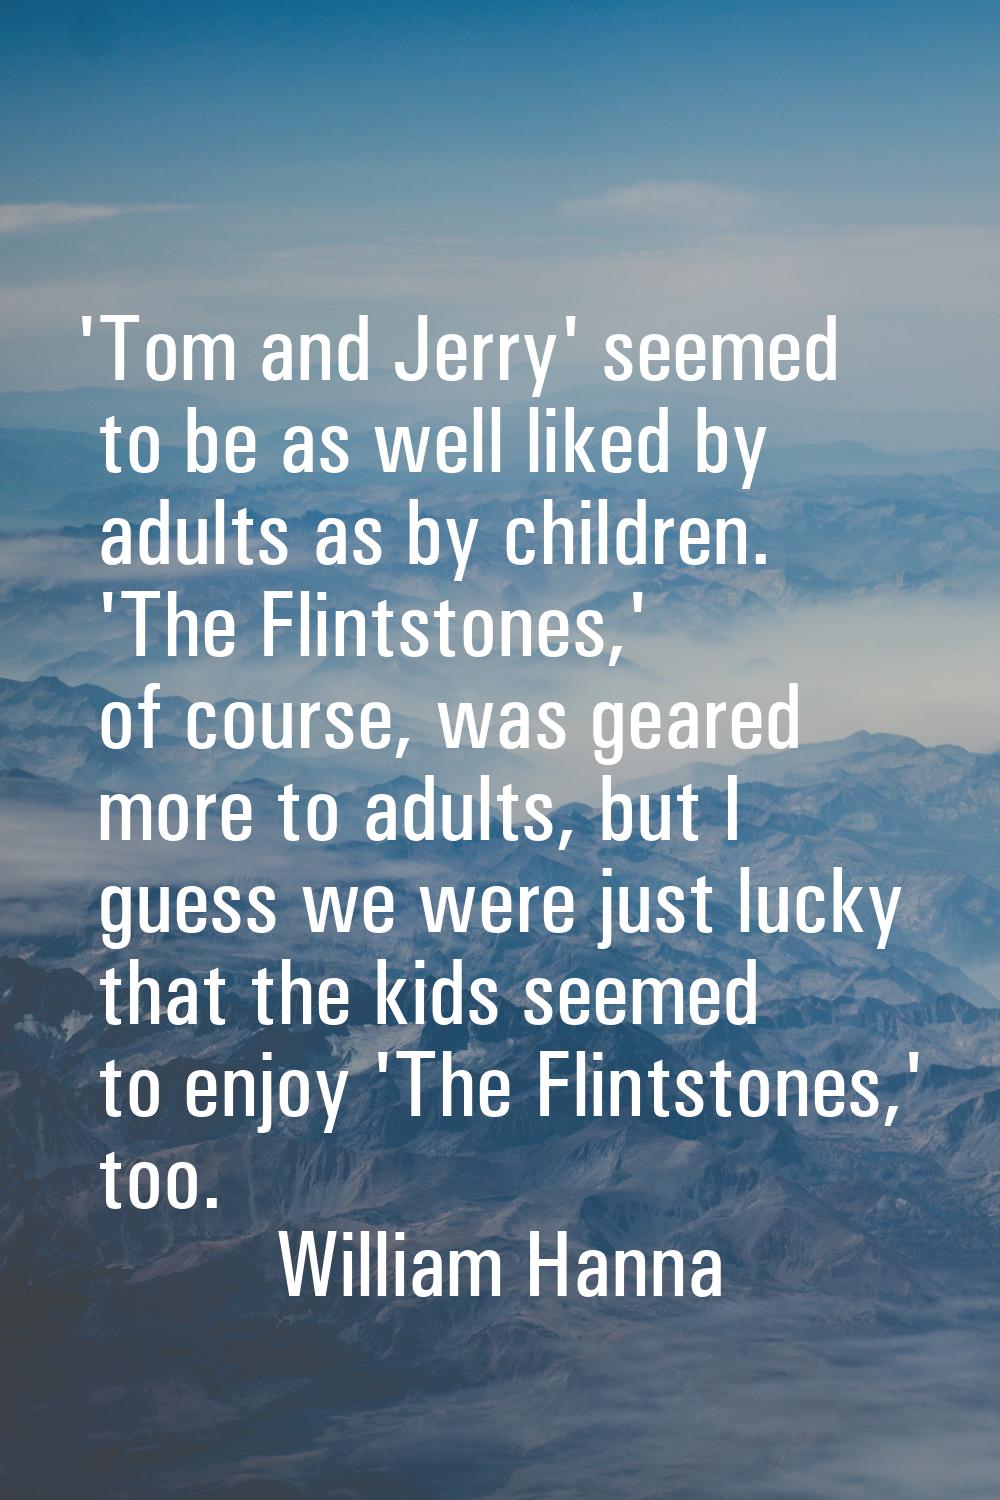 'Tom and Jerry' seemed to be as well liked by adults as by children. 'The Flintstones,' of course, 